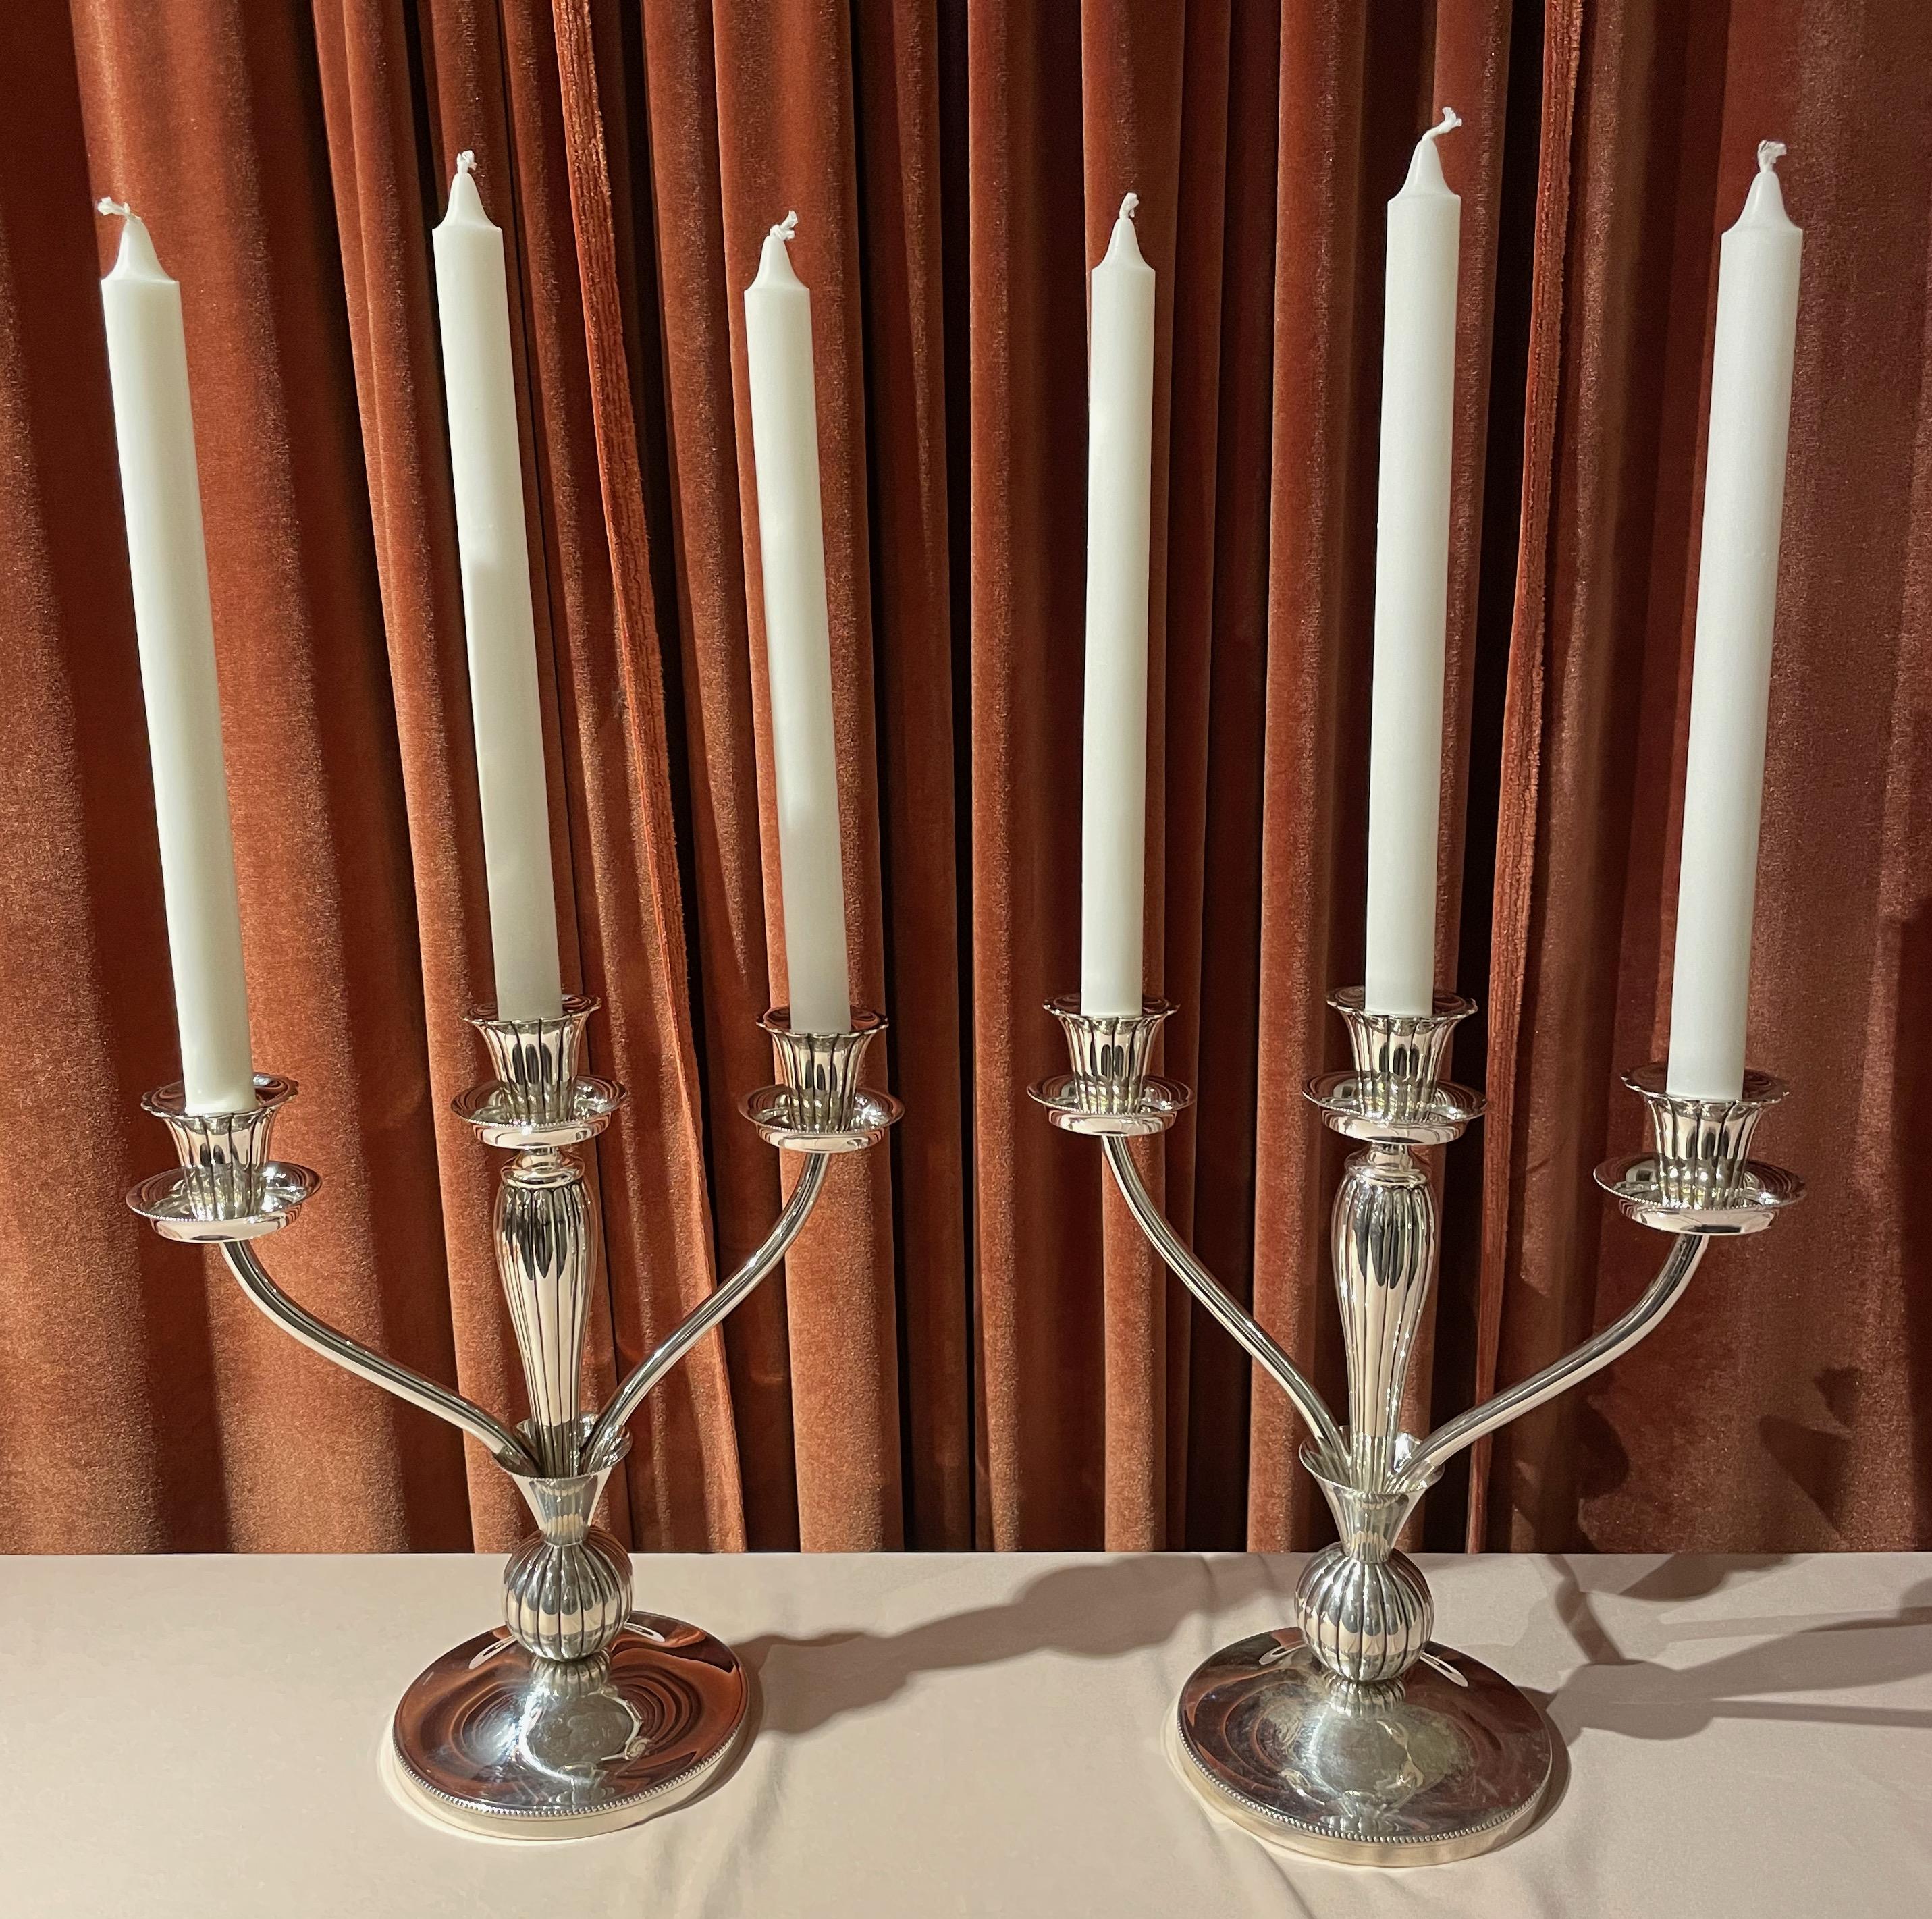 European Art Deco 925 silver pair of candlesticks Formal style with tremendous details, each piece stamped with fleur de leis and the 925 symbols. Quality construction that allows you to remove any of the wax pans for cleaning as well as the